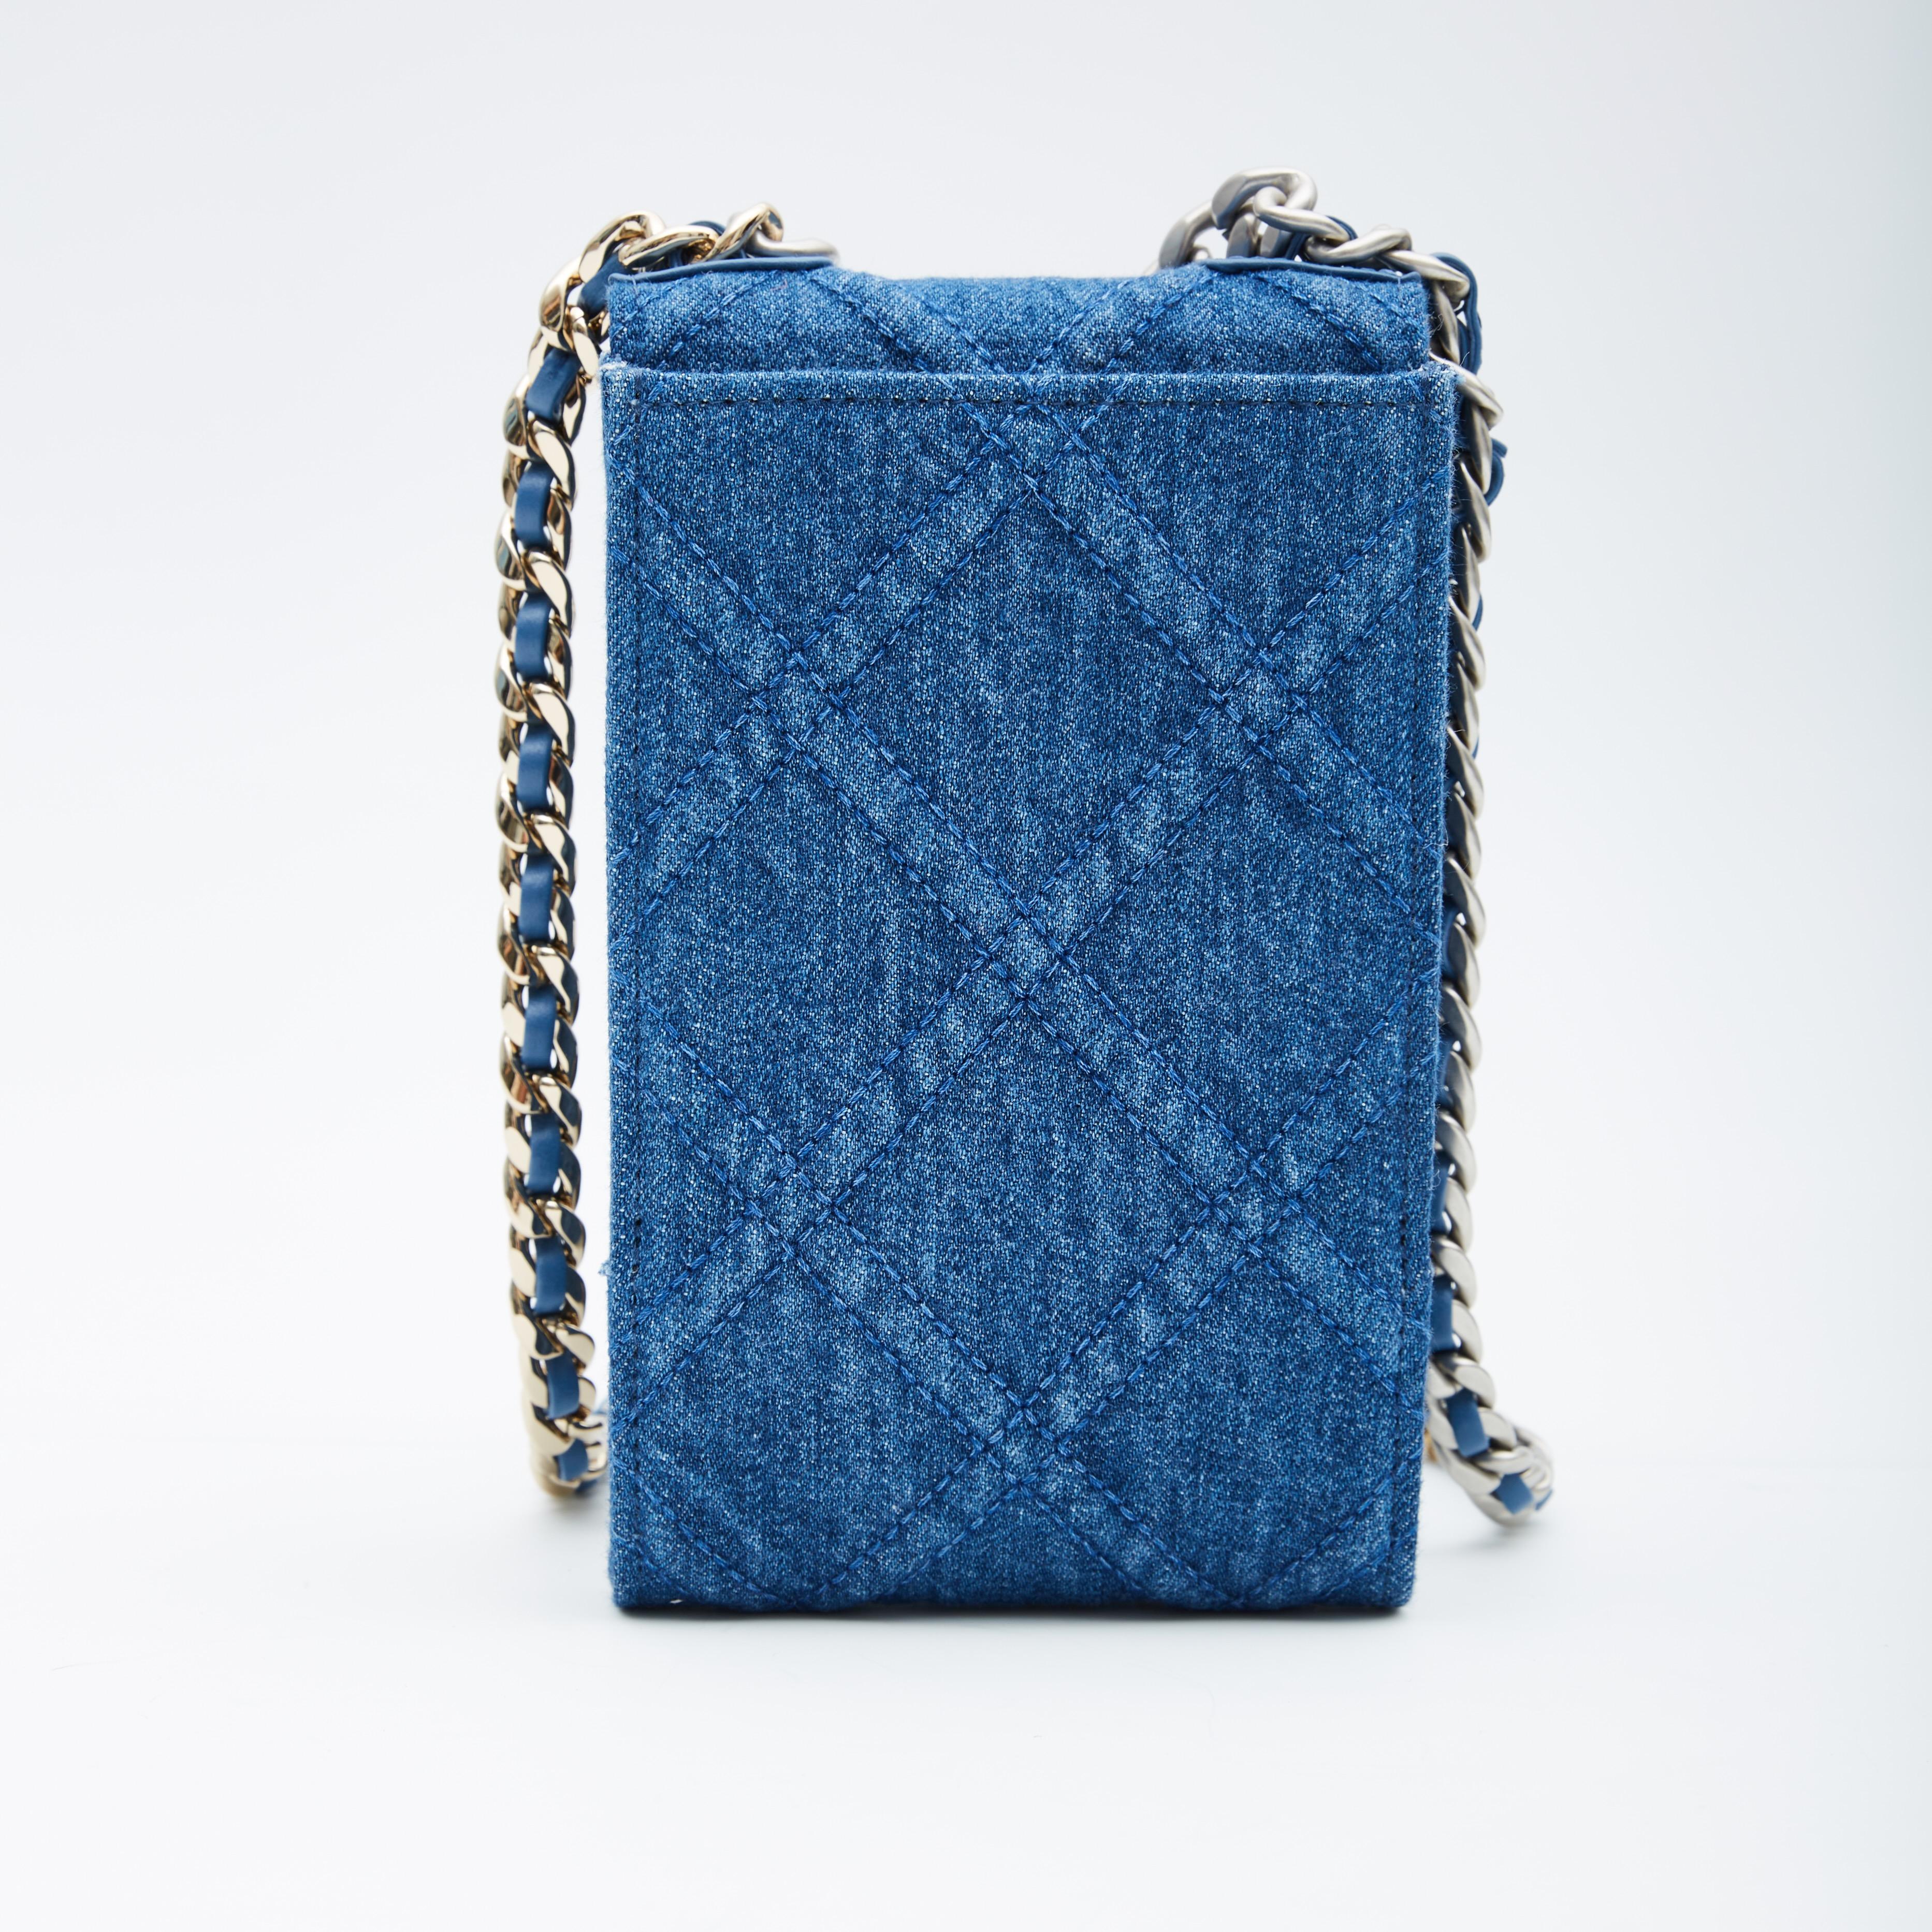 This crossbody bag is made of blue denim with blue leather details and features a sliver chain crossbody strap interlaced with blue leather, a leather shoulder pad, a front flap with snap closure, sliver tone and gold hardware and a blue fabric